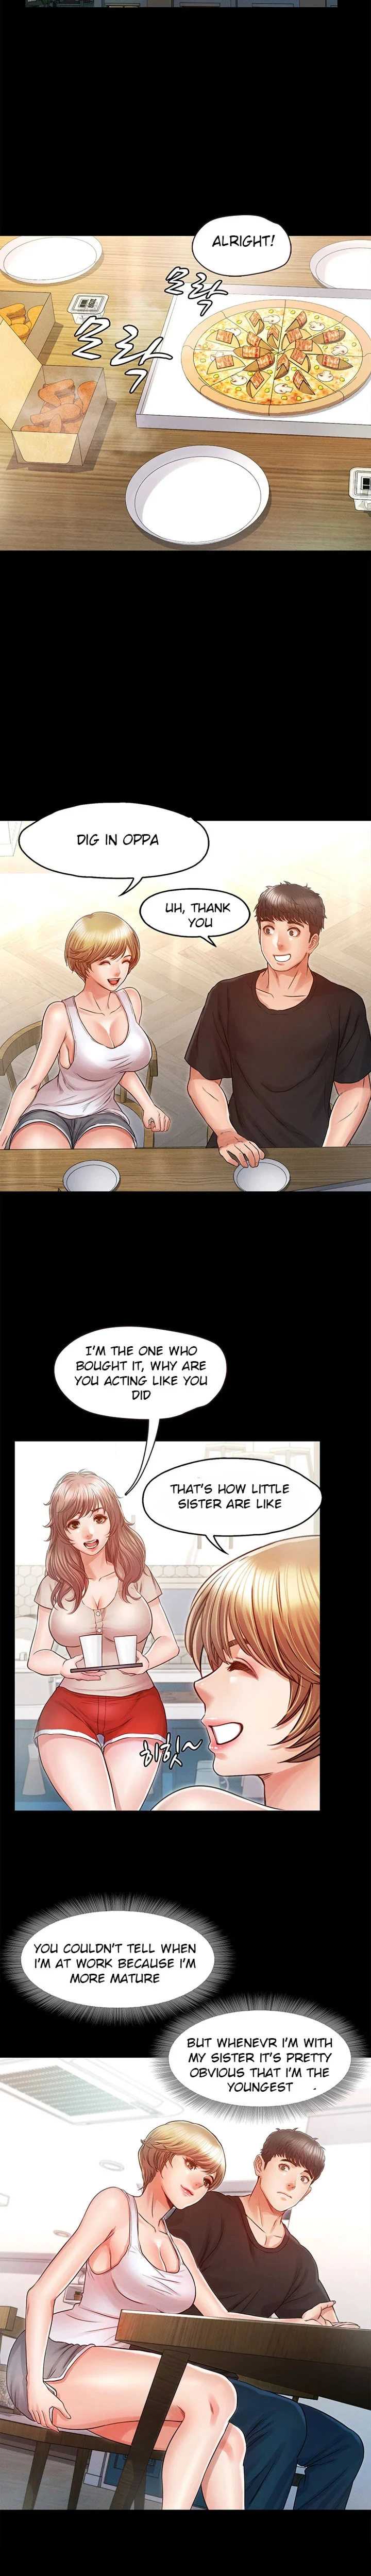 Who Did You Do With? - Chapter 27 Page 3